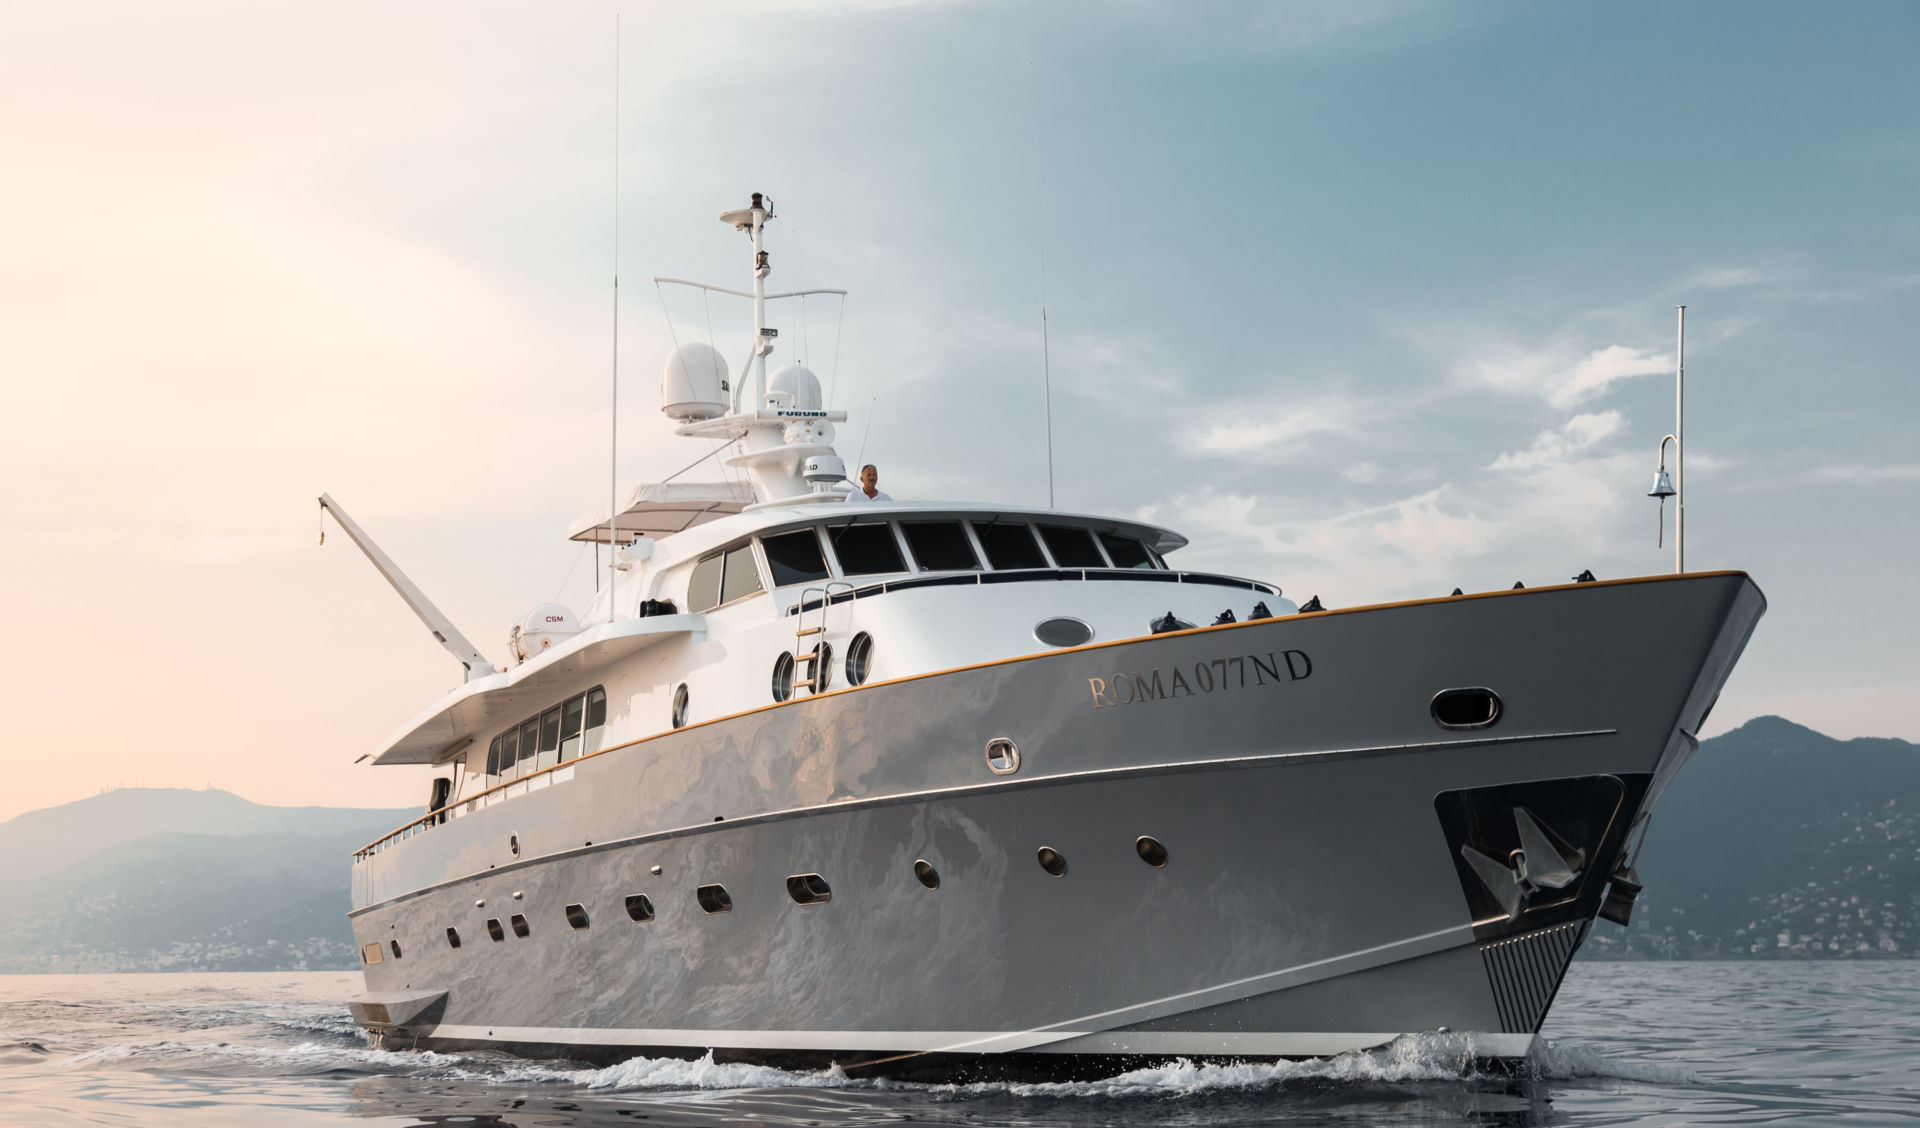 M/Y PAOLUCCI yacht for charter anchored